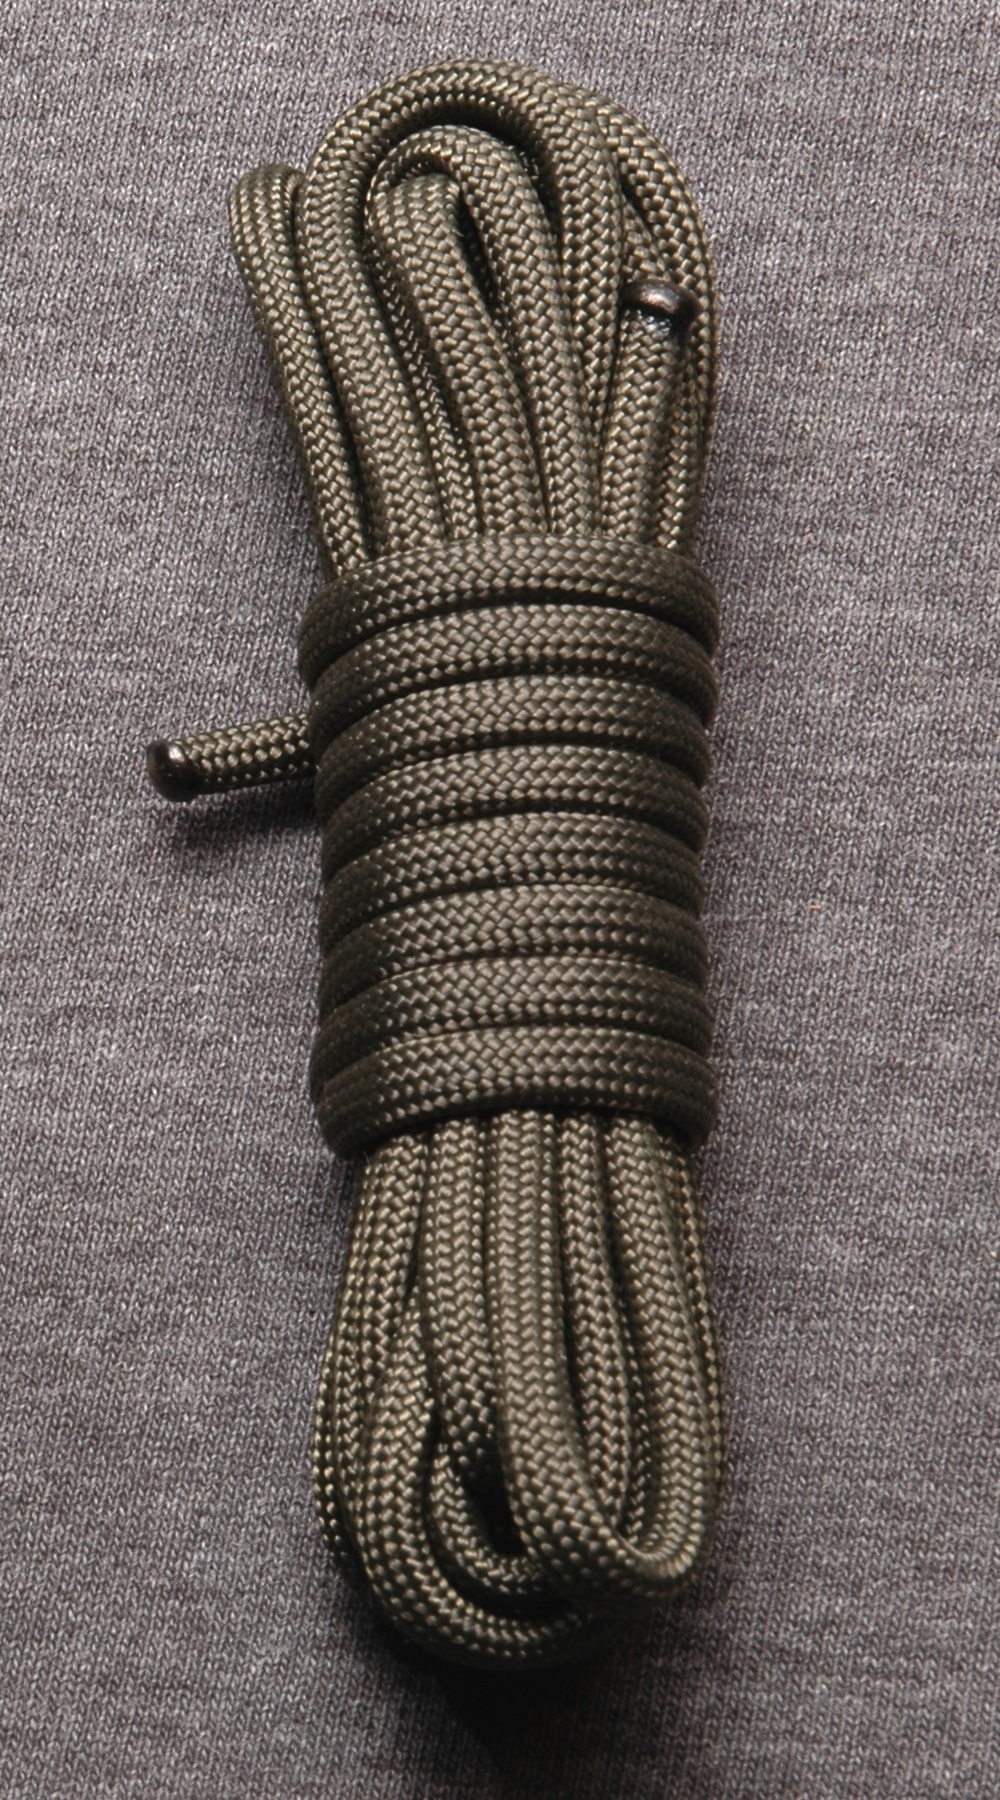 Paracord-Commercial-Type-III-Coil.jpg